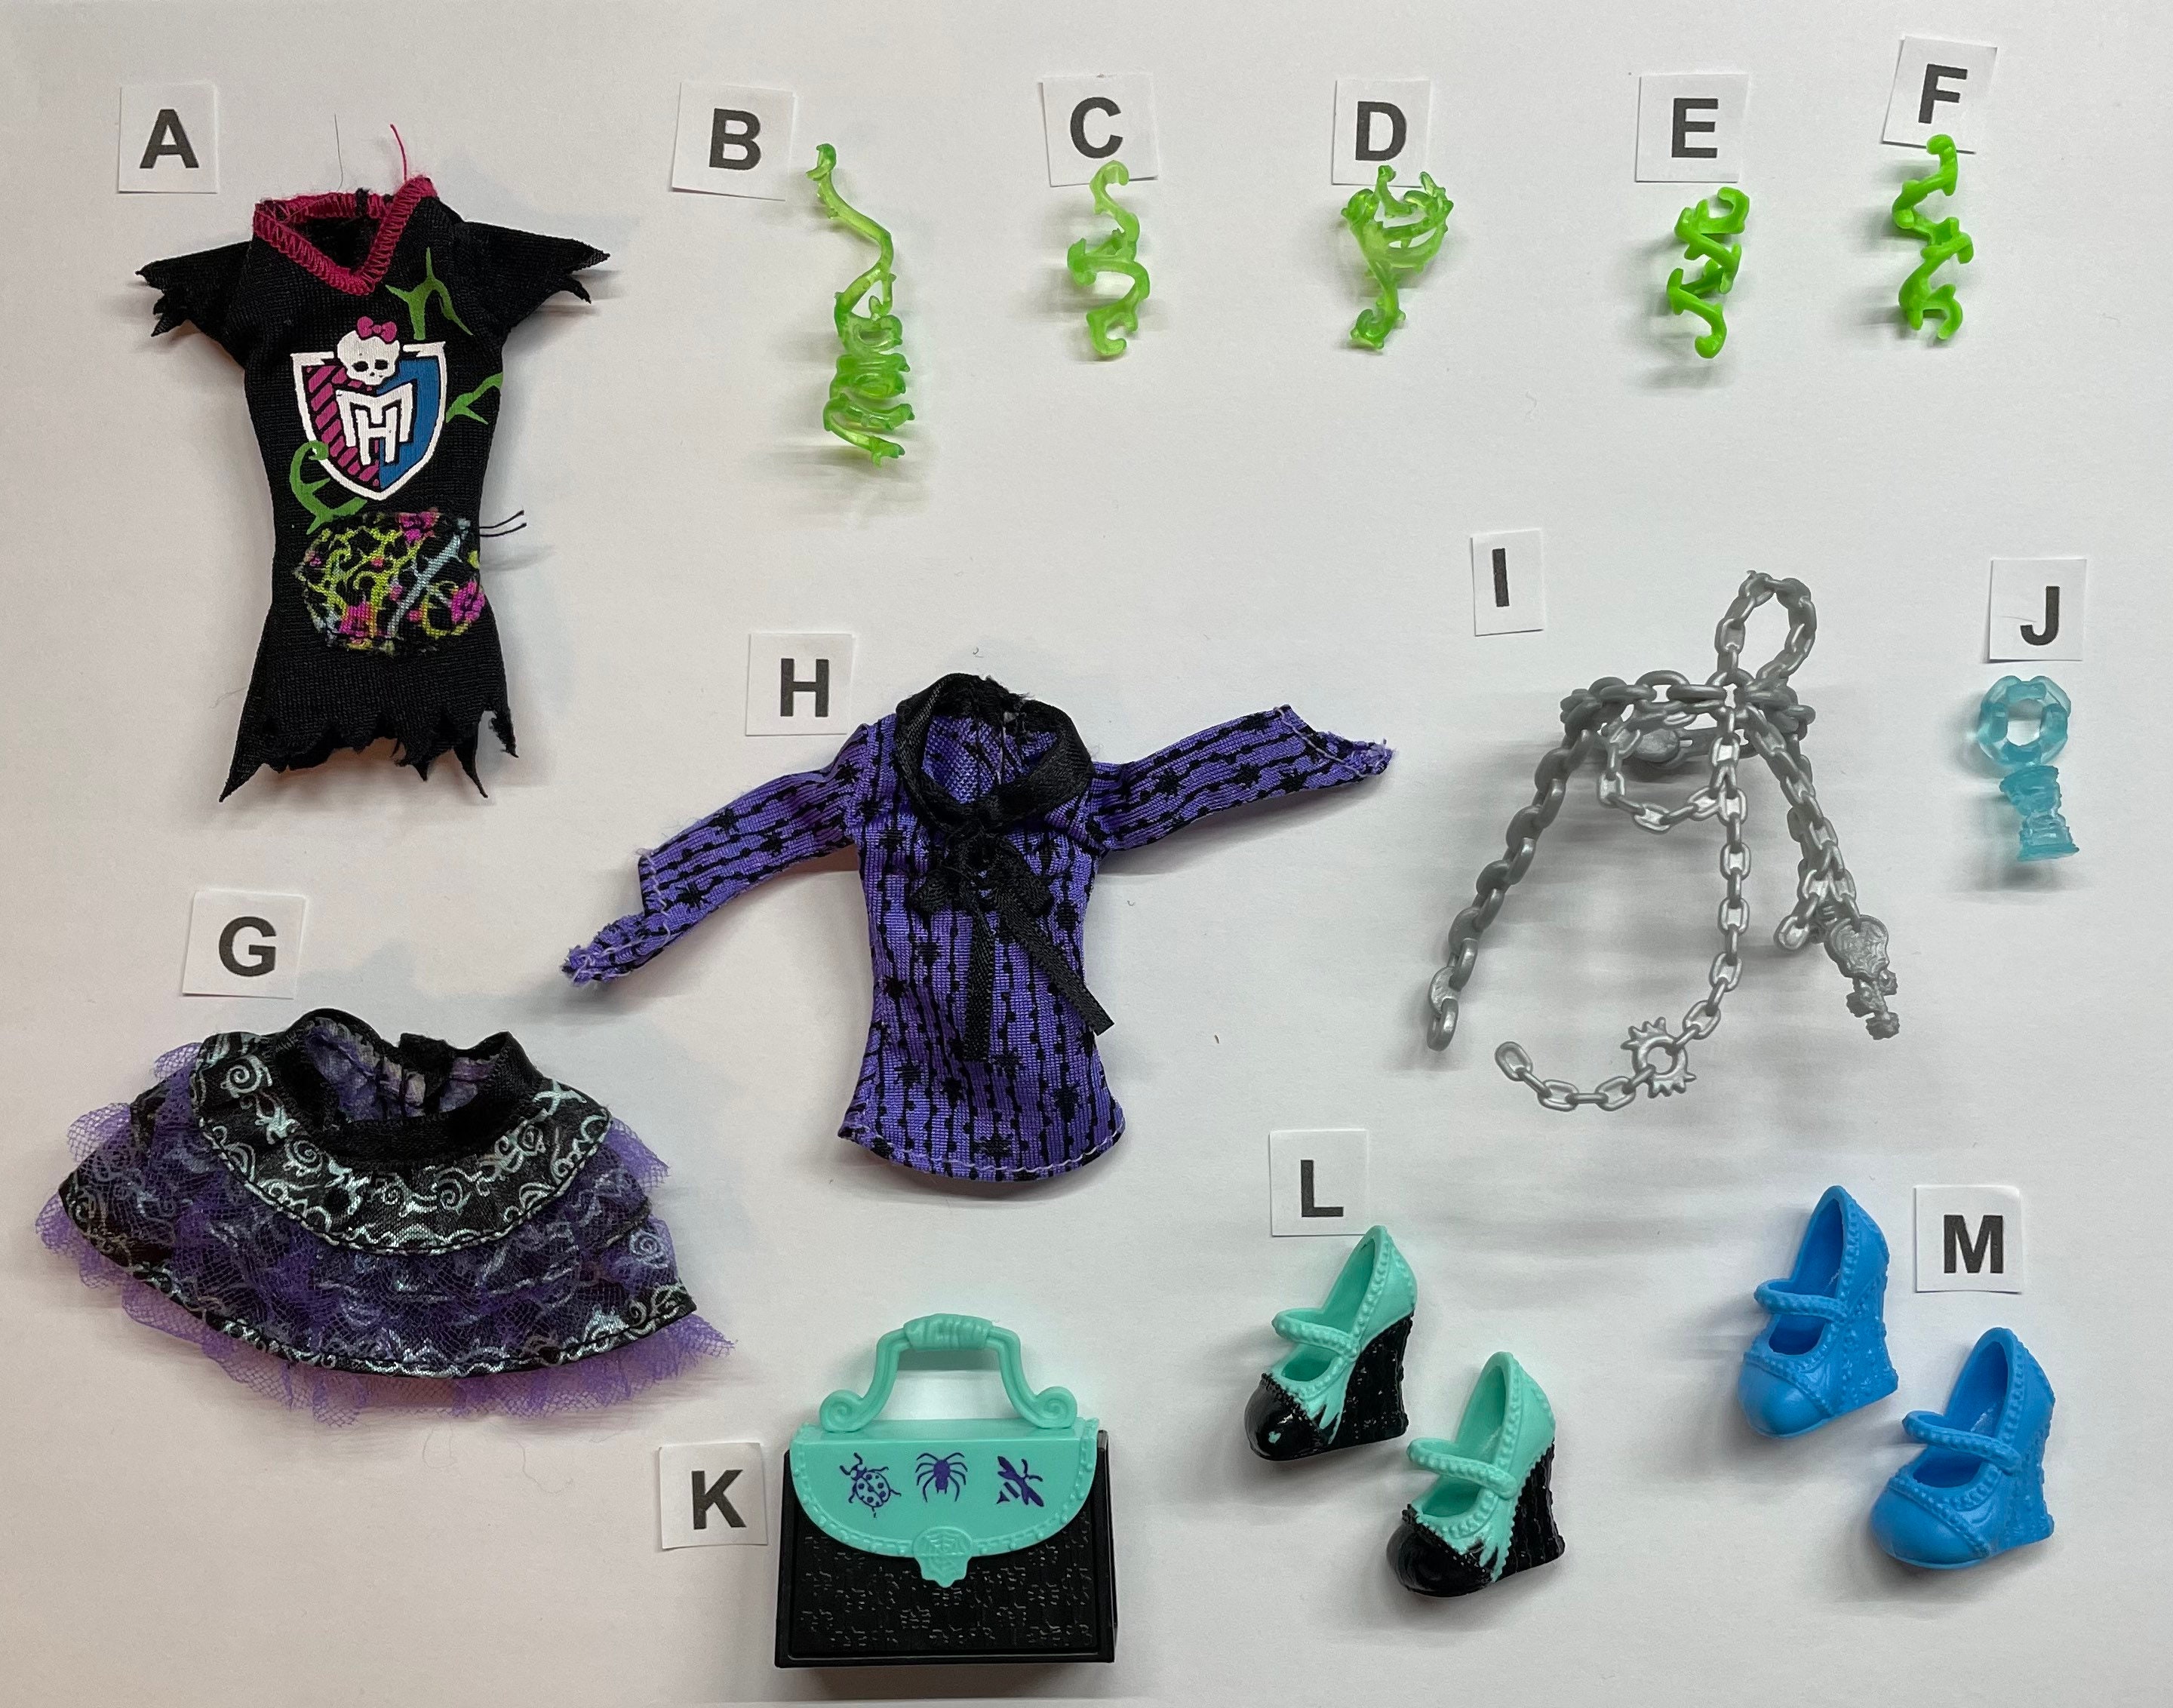 Monster High Doll, Twyla Creepover Party Set with Pet Bunny Dustin,  Sleepover Clothes and Accessories